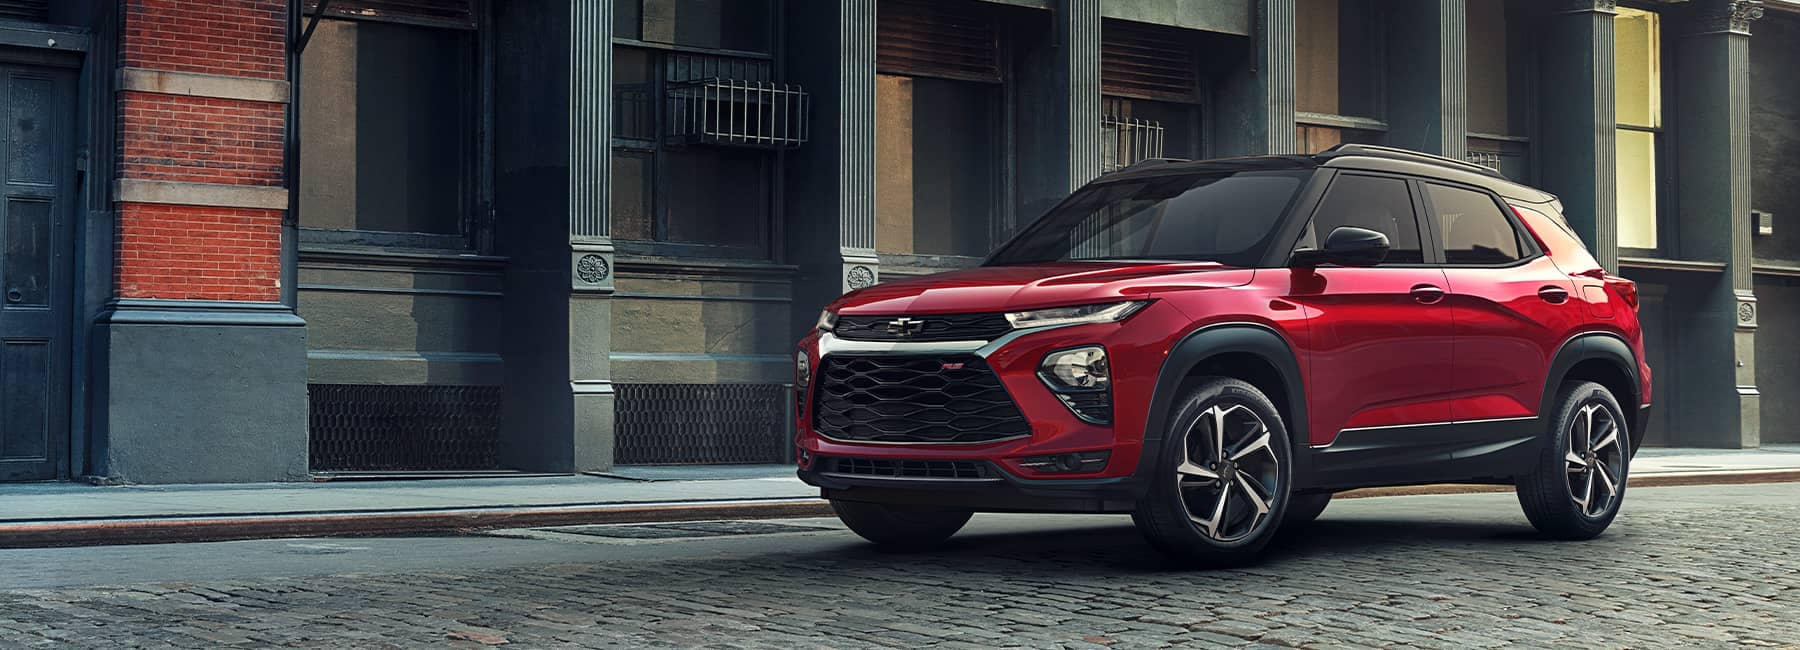 2021 Chevrolet Trailblazer parked in front of a city building